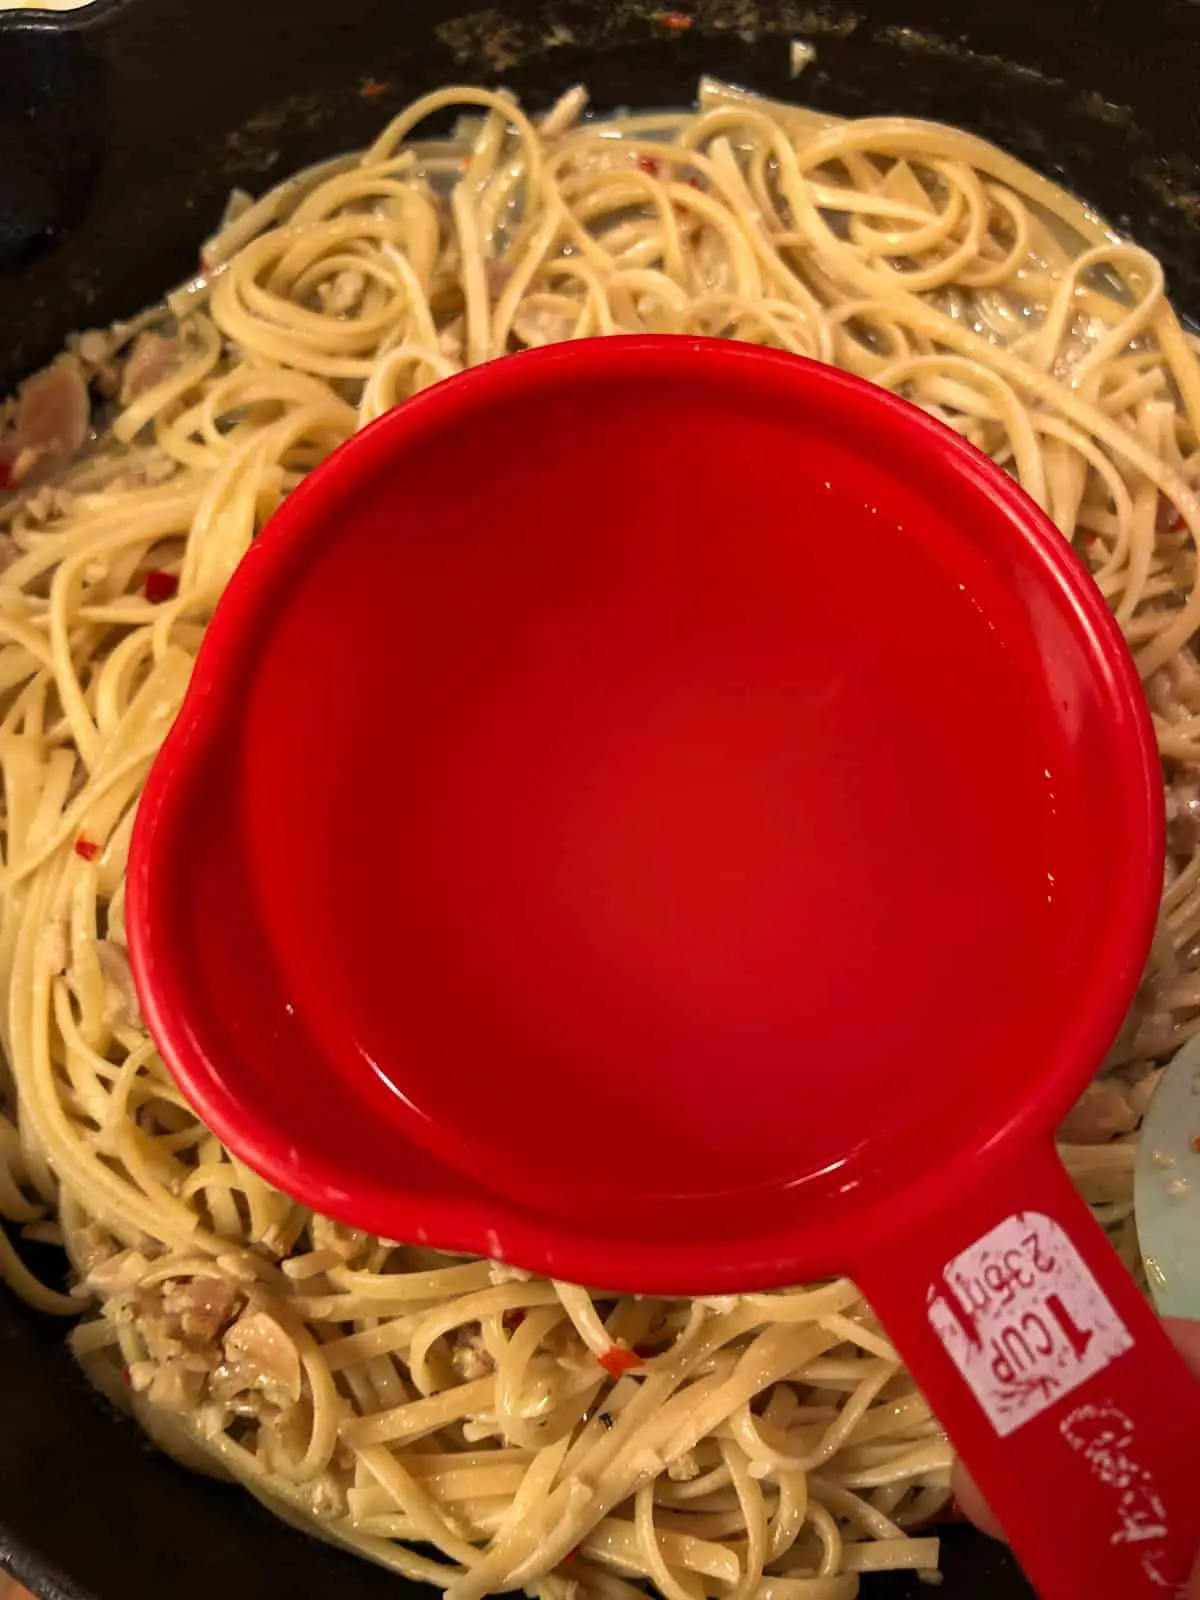 Linguine in the background in a pot with a red measuring cup in the foreground that contains pasta water.